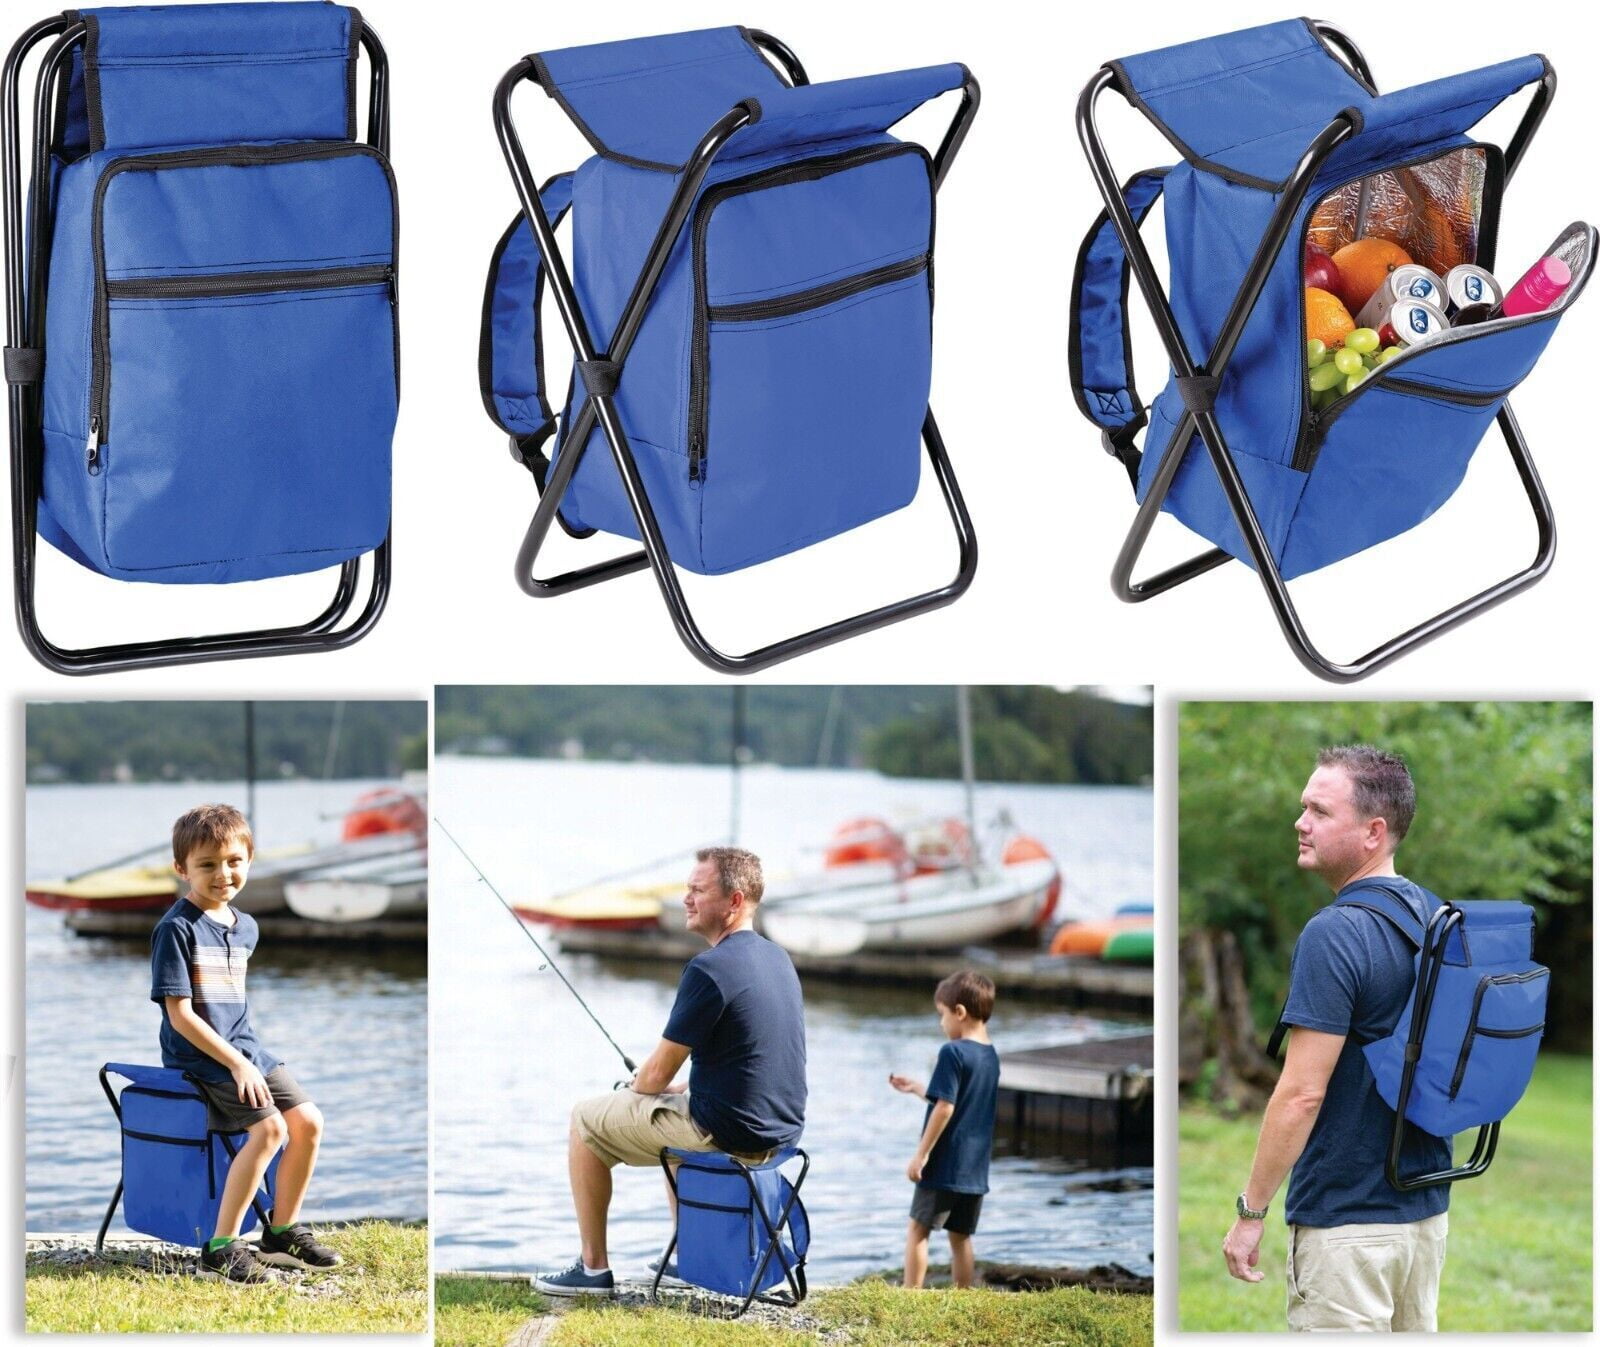 Folding Cooler and Stool Backpack - Multifunction Collapsible Camping Seat  and Insulated Ice Bag Backpack Chair 